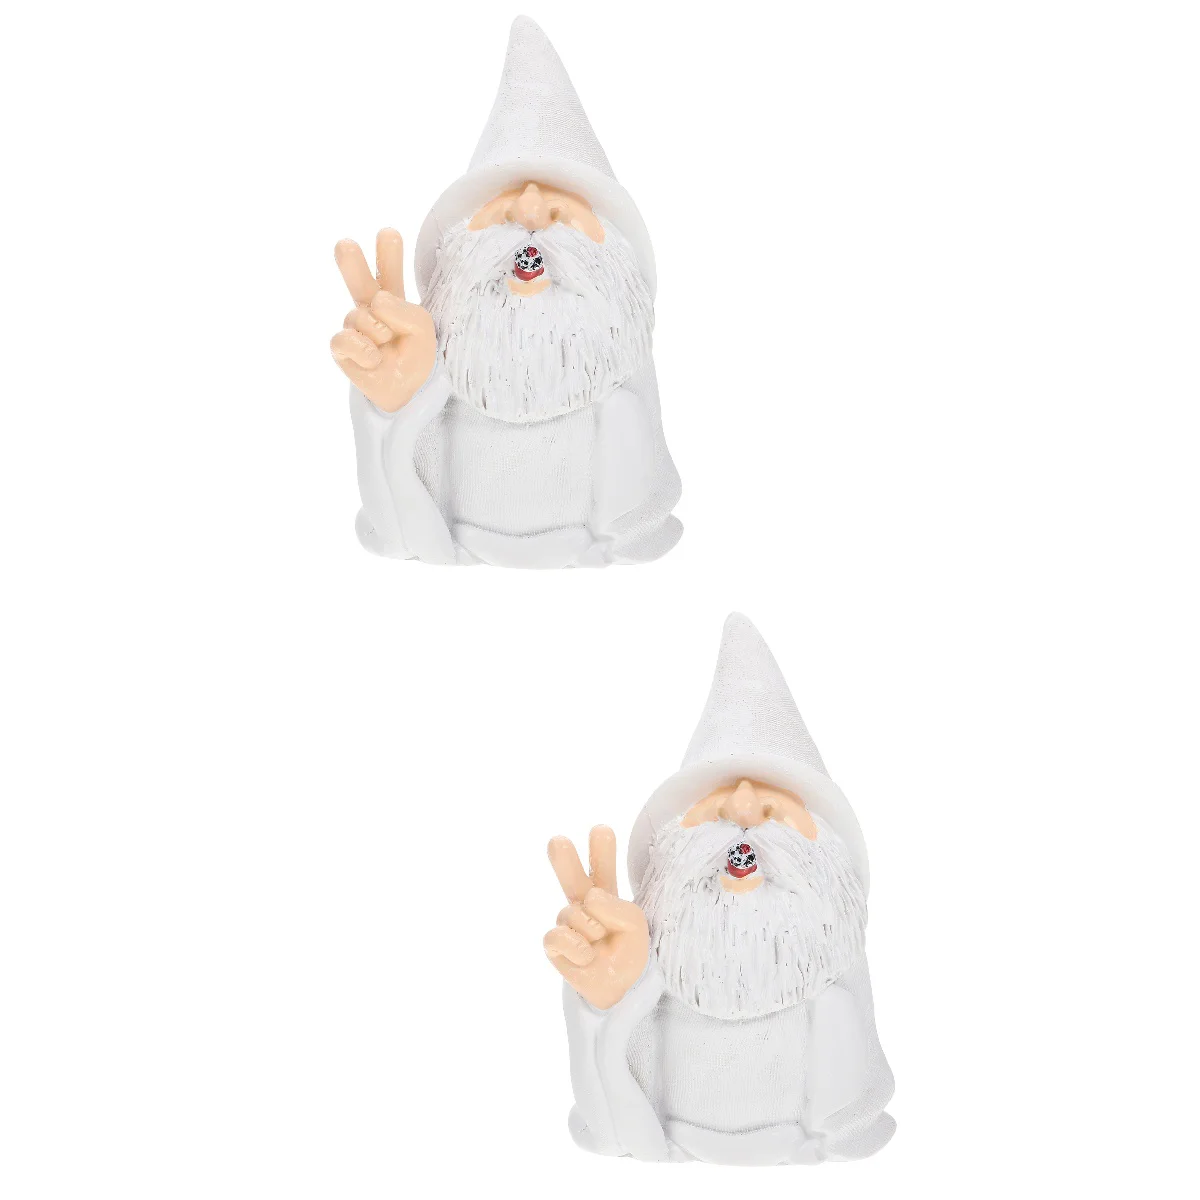 

Gnome Statue Sculpture Garden Dwarf Guest Resin Greeter Lawn Ornament White Porch Front Christmas Sign Crafts Patio Elf Fig